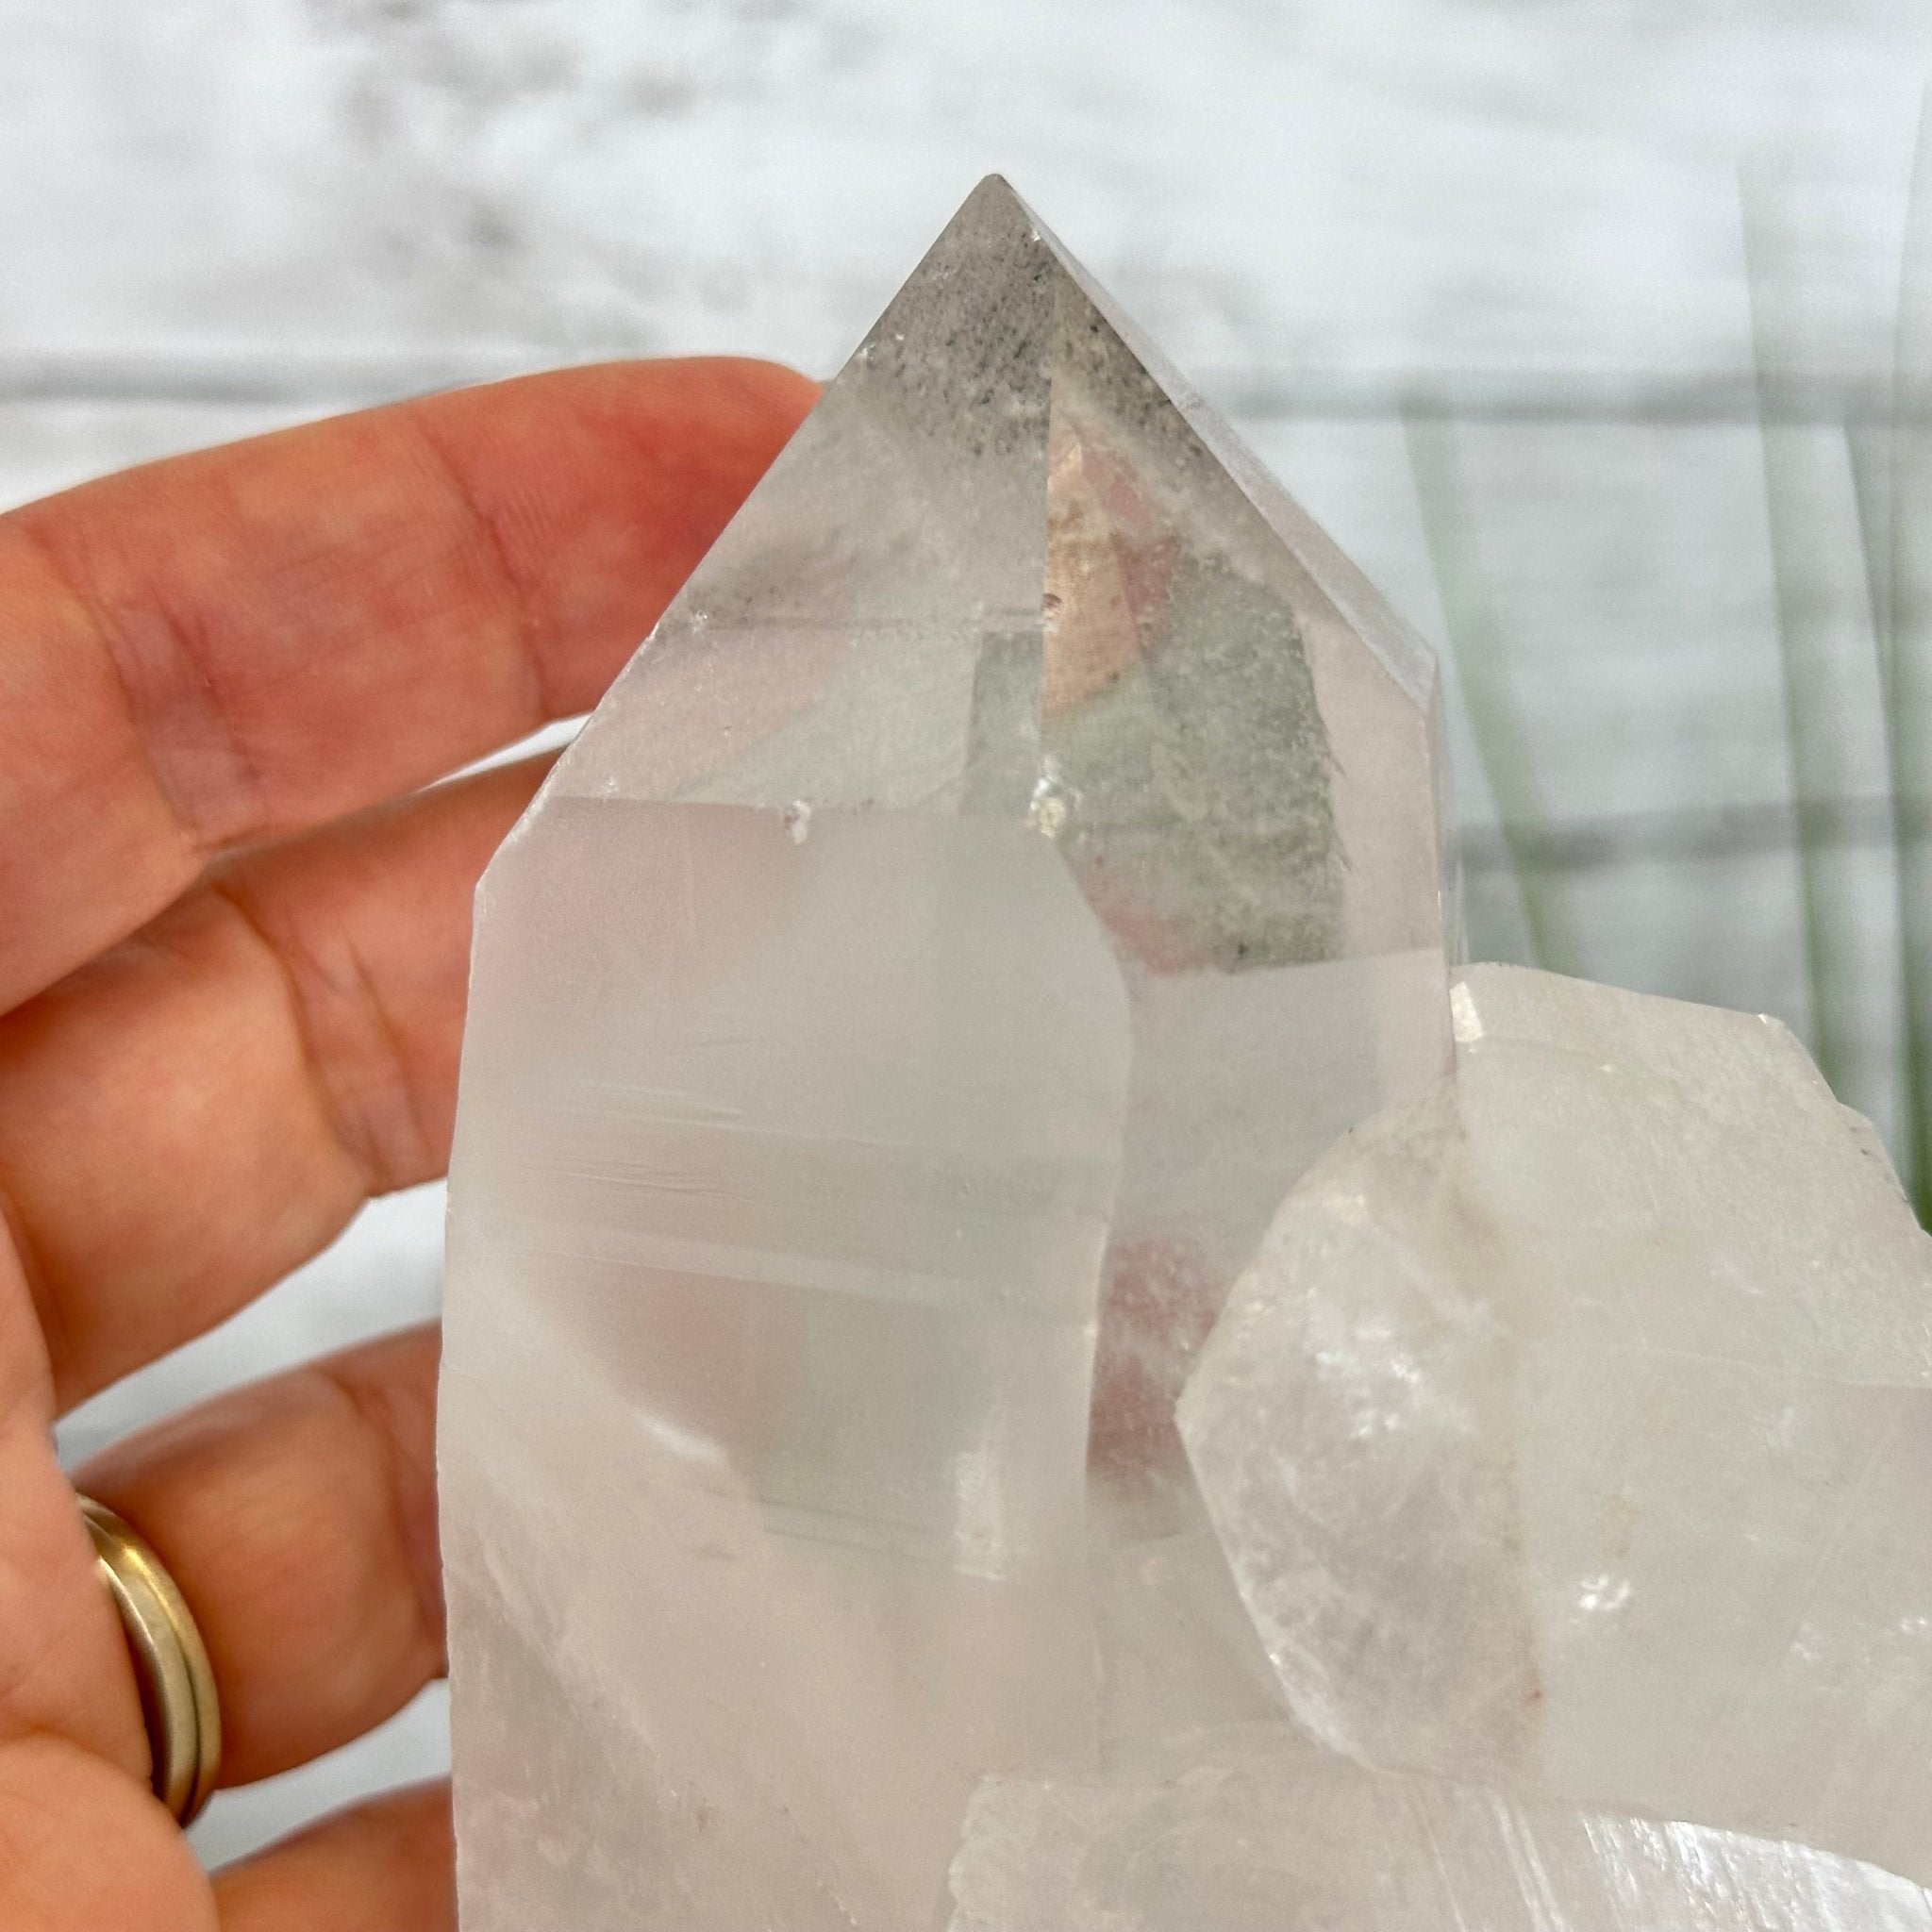 Clear Quartz Crystal Point on Fixed Base, 4.9 lbs & 11.5" Tall #3122CQ-009 - Brazil GemsBrazil GemsClear Quartz Crystal Point on Fixed Base, 4.9 lbs & 11.5" Tall #3122CQ-009Crystal Points3122CQ-009